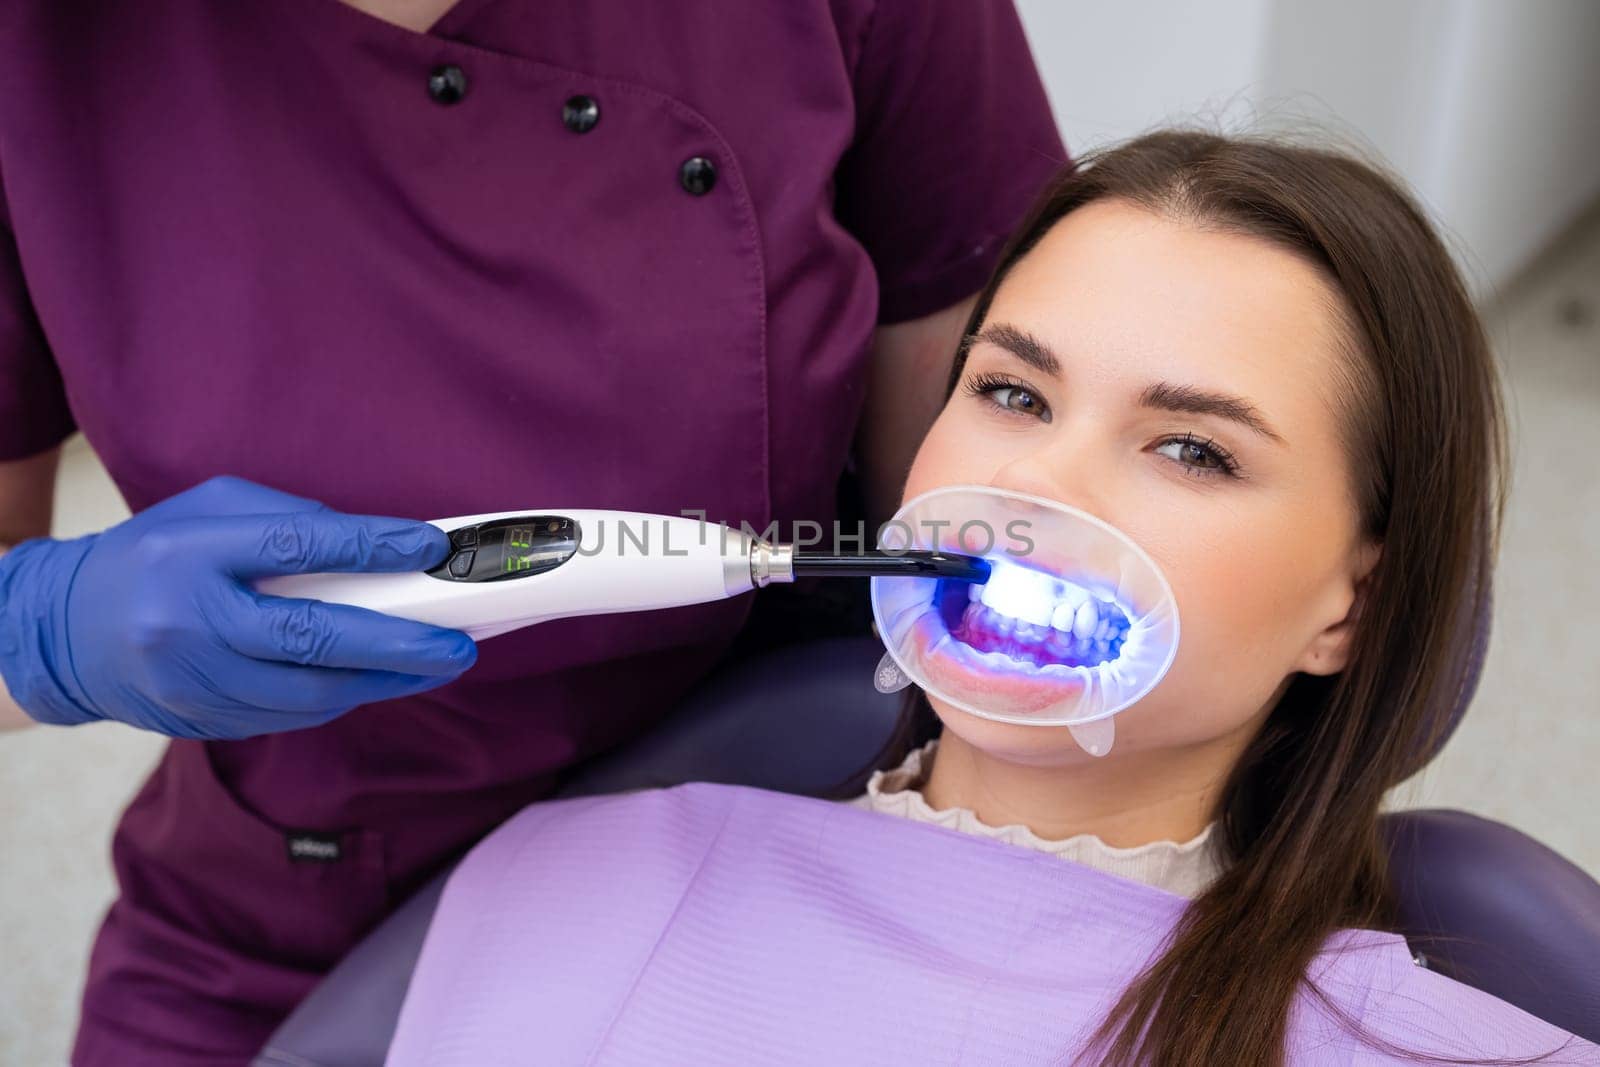 Dentist employs a UV lamp to cure the fillings in the patients teeth.